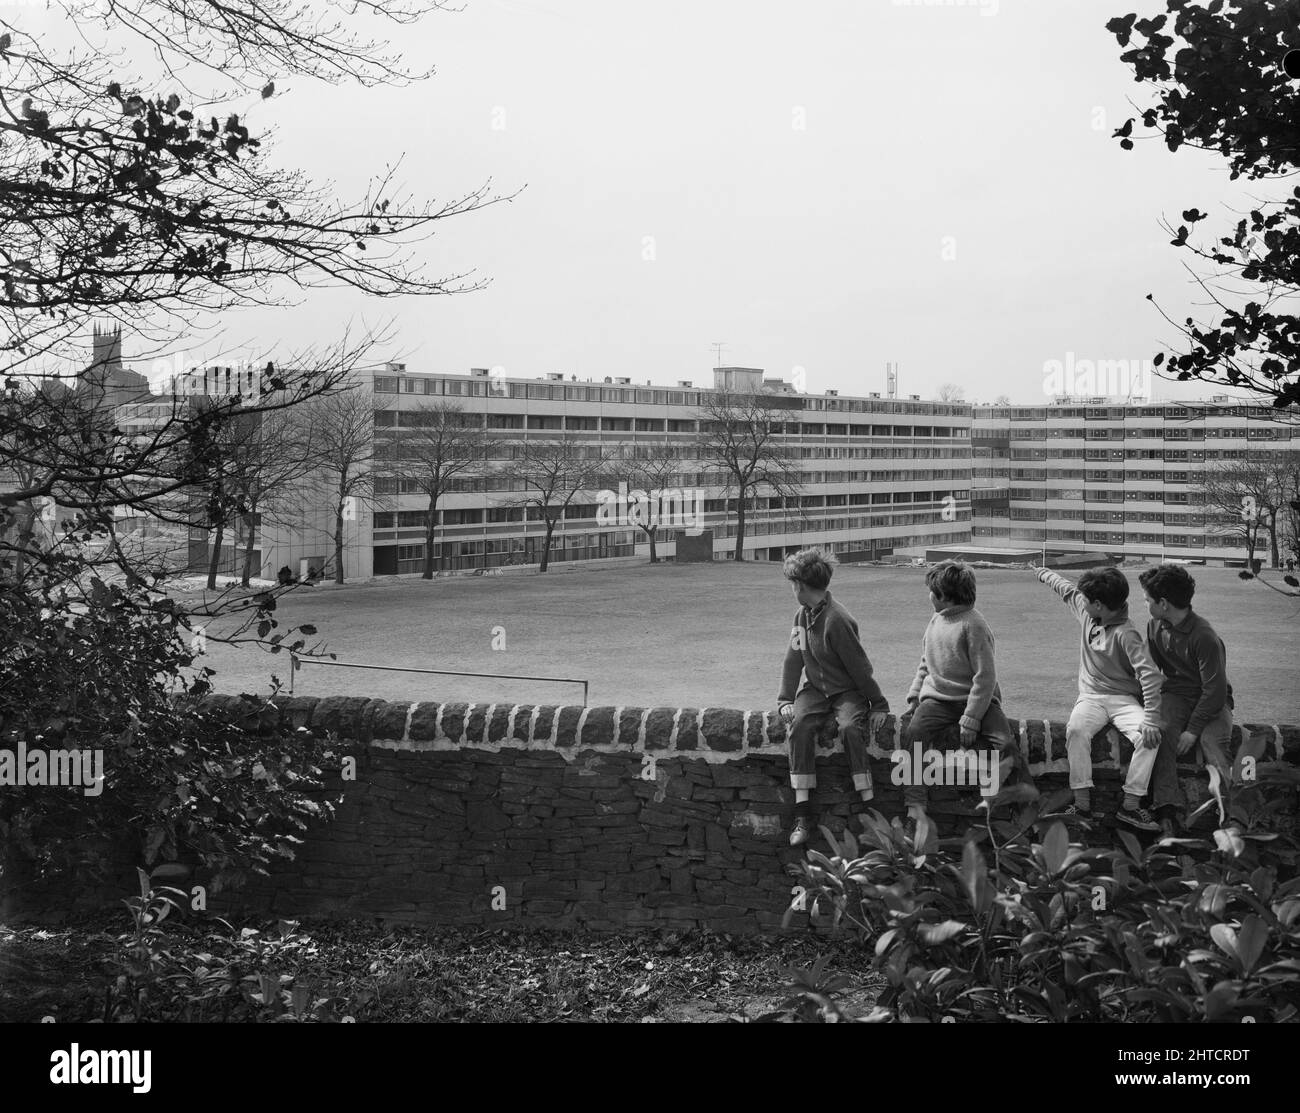 Victoria Park Estate, Macclesfield, Cheshire East, Cheshire, 18/04/1968. Four boys sitting on a stone wall, looking towards flats in the distance at the Victoria Park development, built using the 12M Jespersen system. In 1963, John Laing and Son Ltd bought the rights to the Danish industrialised building system for flats known as Jespersen (sometimes referred to as Jesperson). The company built factories in Scotland, Hampshire and Lancashire producing Jespersen prefabricated parts and precast concrete panels, allowing the building of housing to be rationalised, saving time and money. The Victo Stock Photo